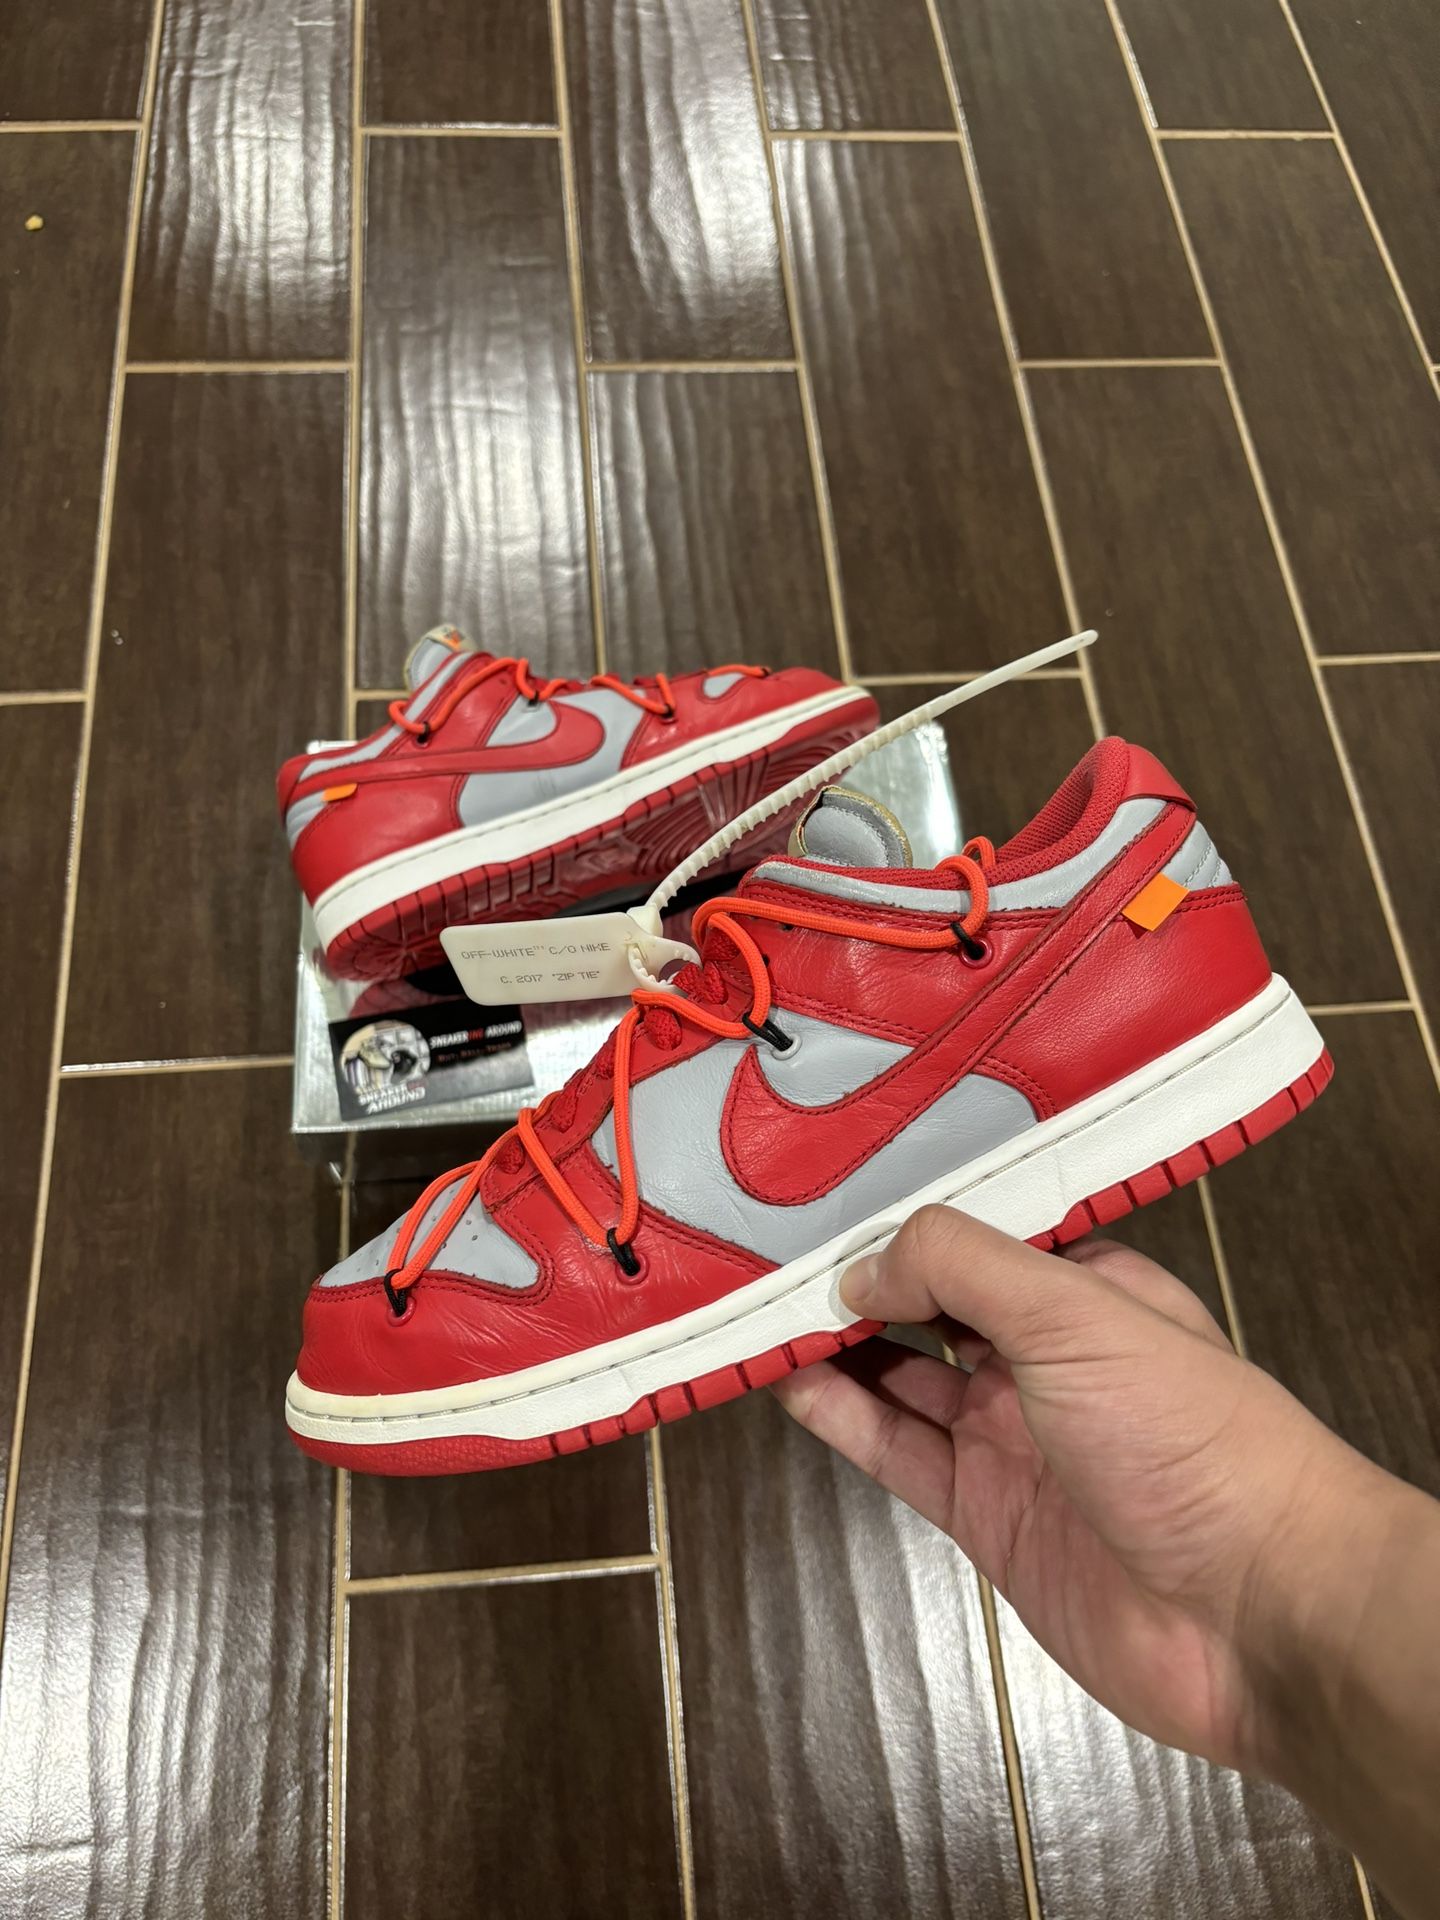 USED Off-White x Nike Dunk Low ‘University Red’ Size 9